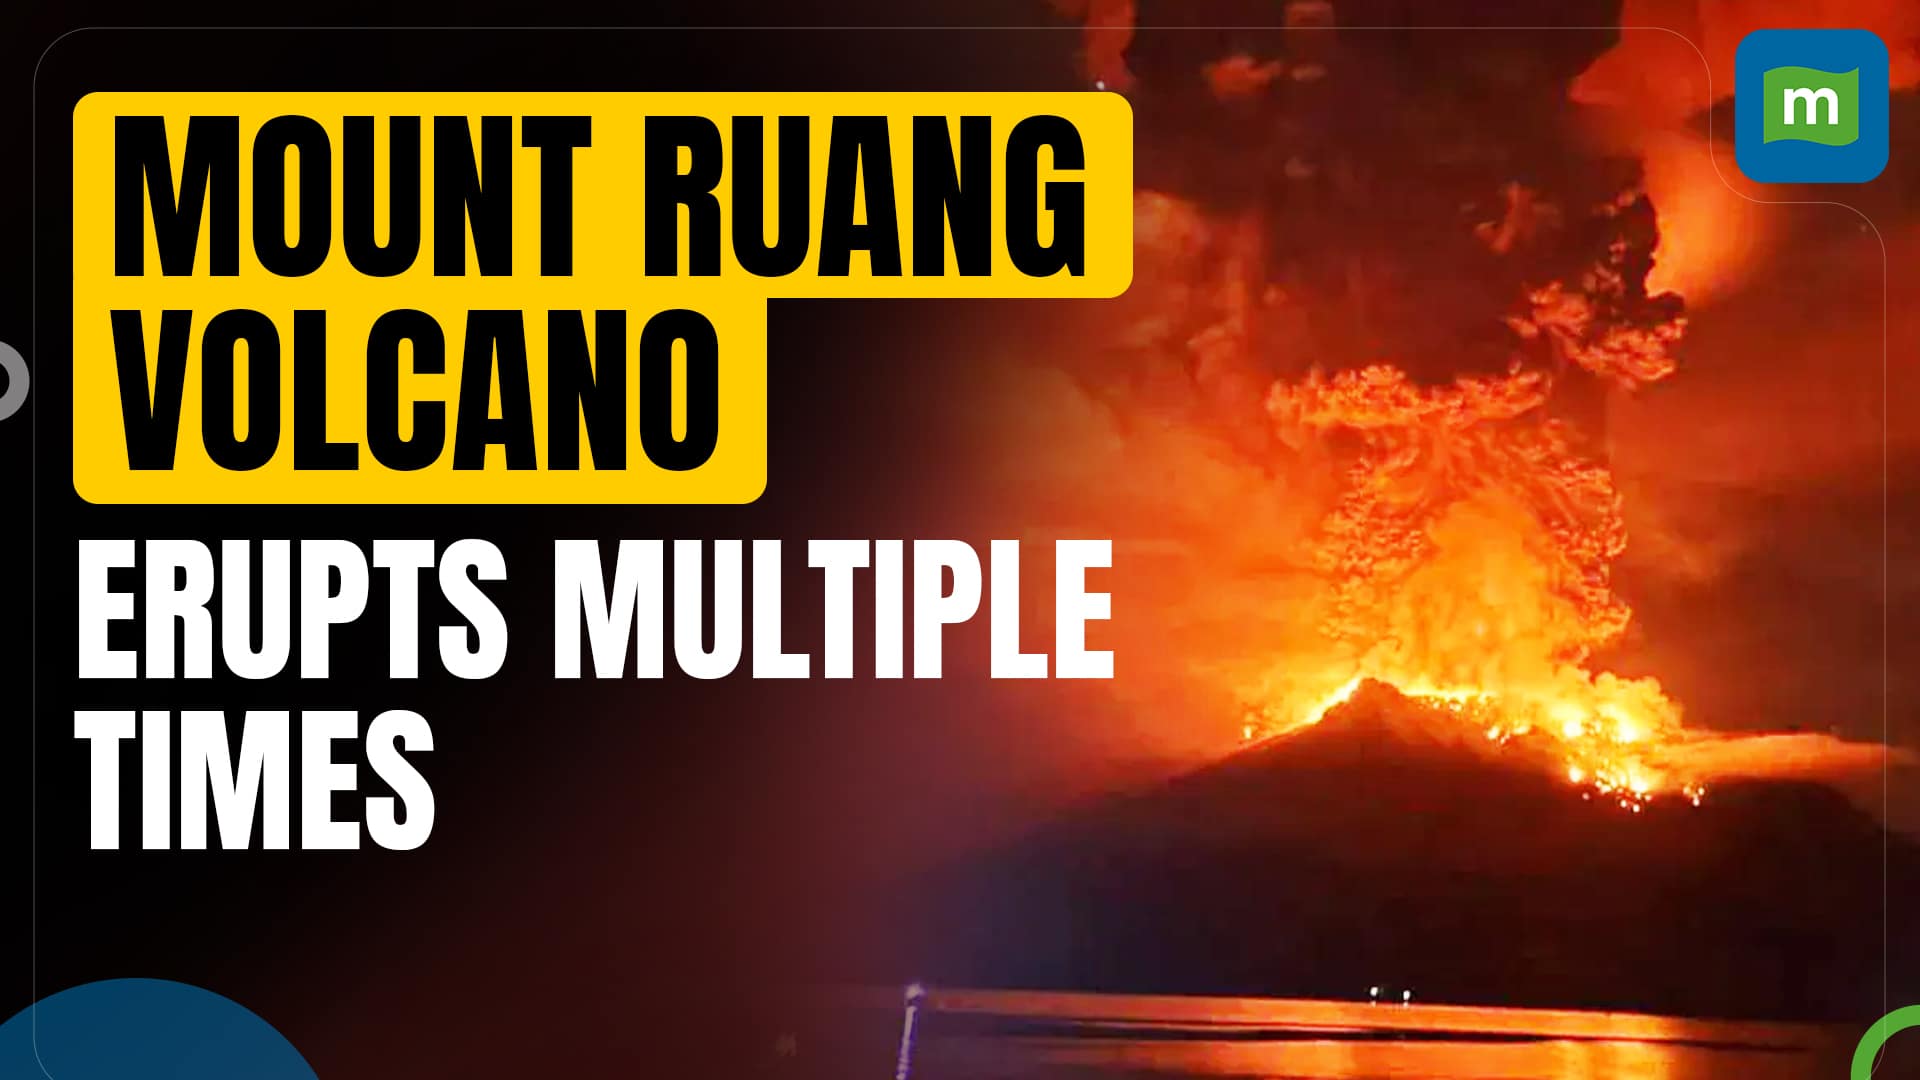 Indonesia's Mount Ruang Volcano Erupts Five Times In A Row | Authorities Issue Tsunami Warnings